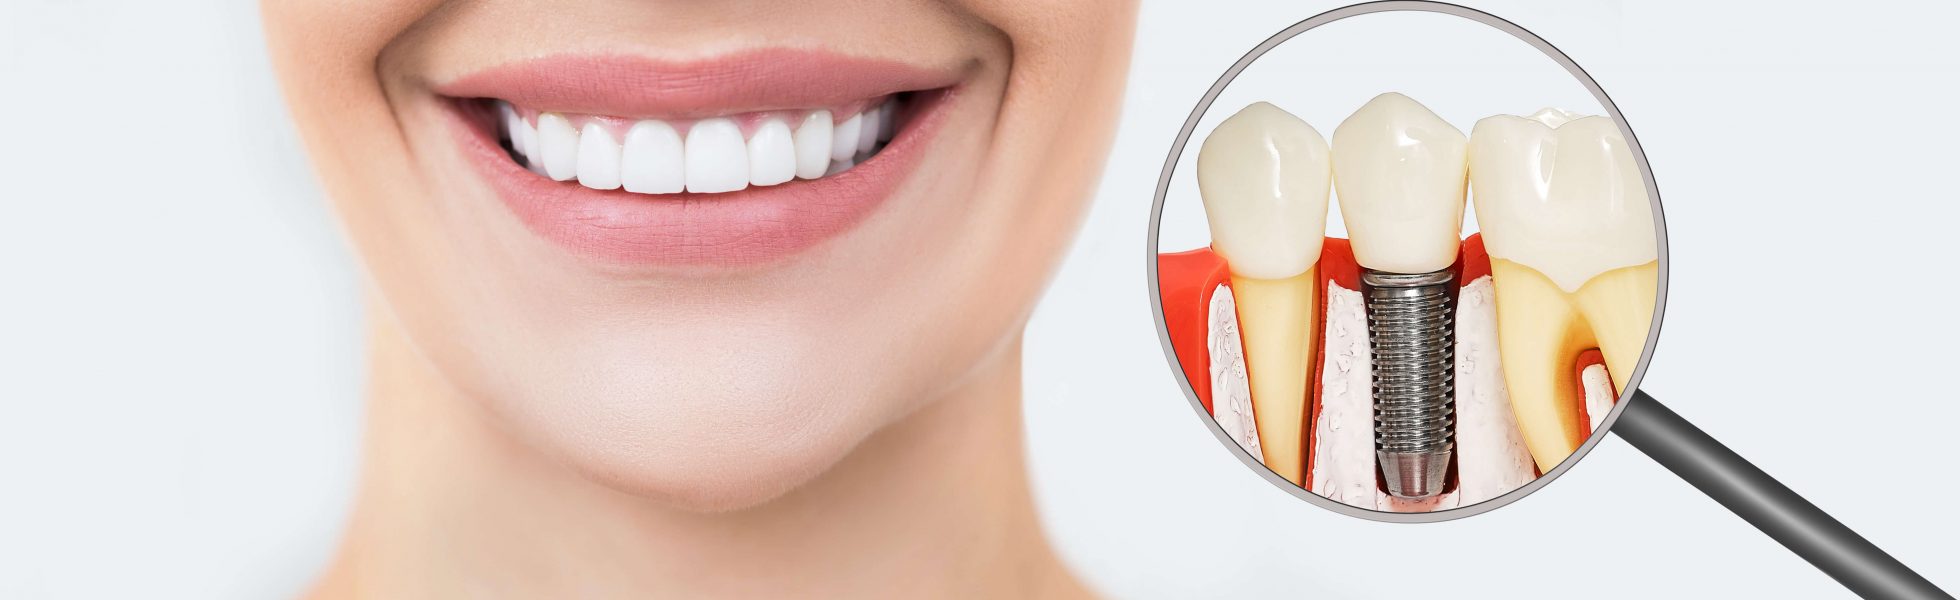 Dental Implants in Mesa: What You Need to Know